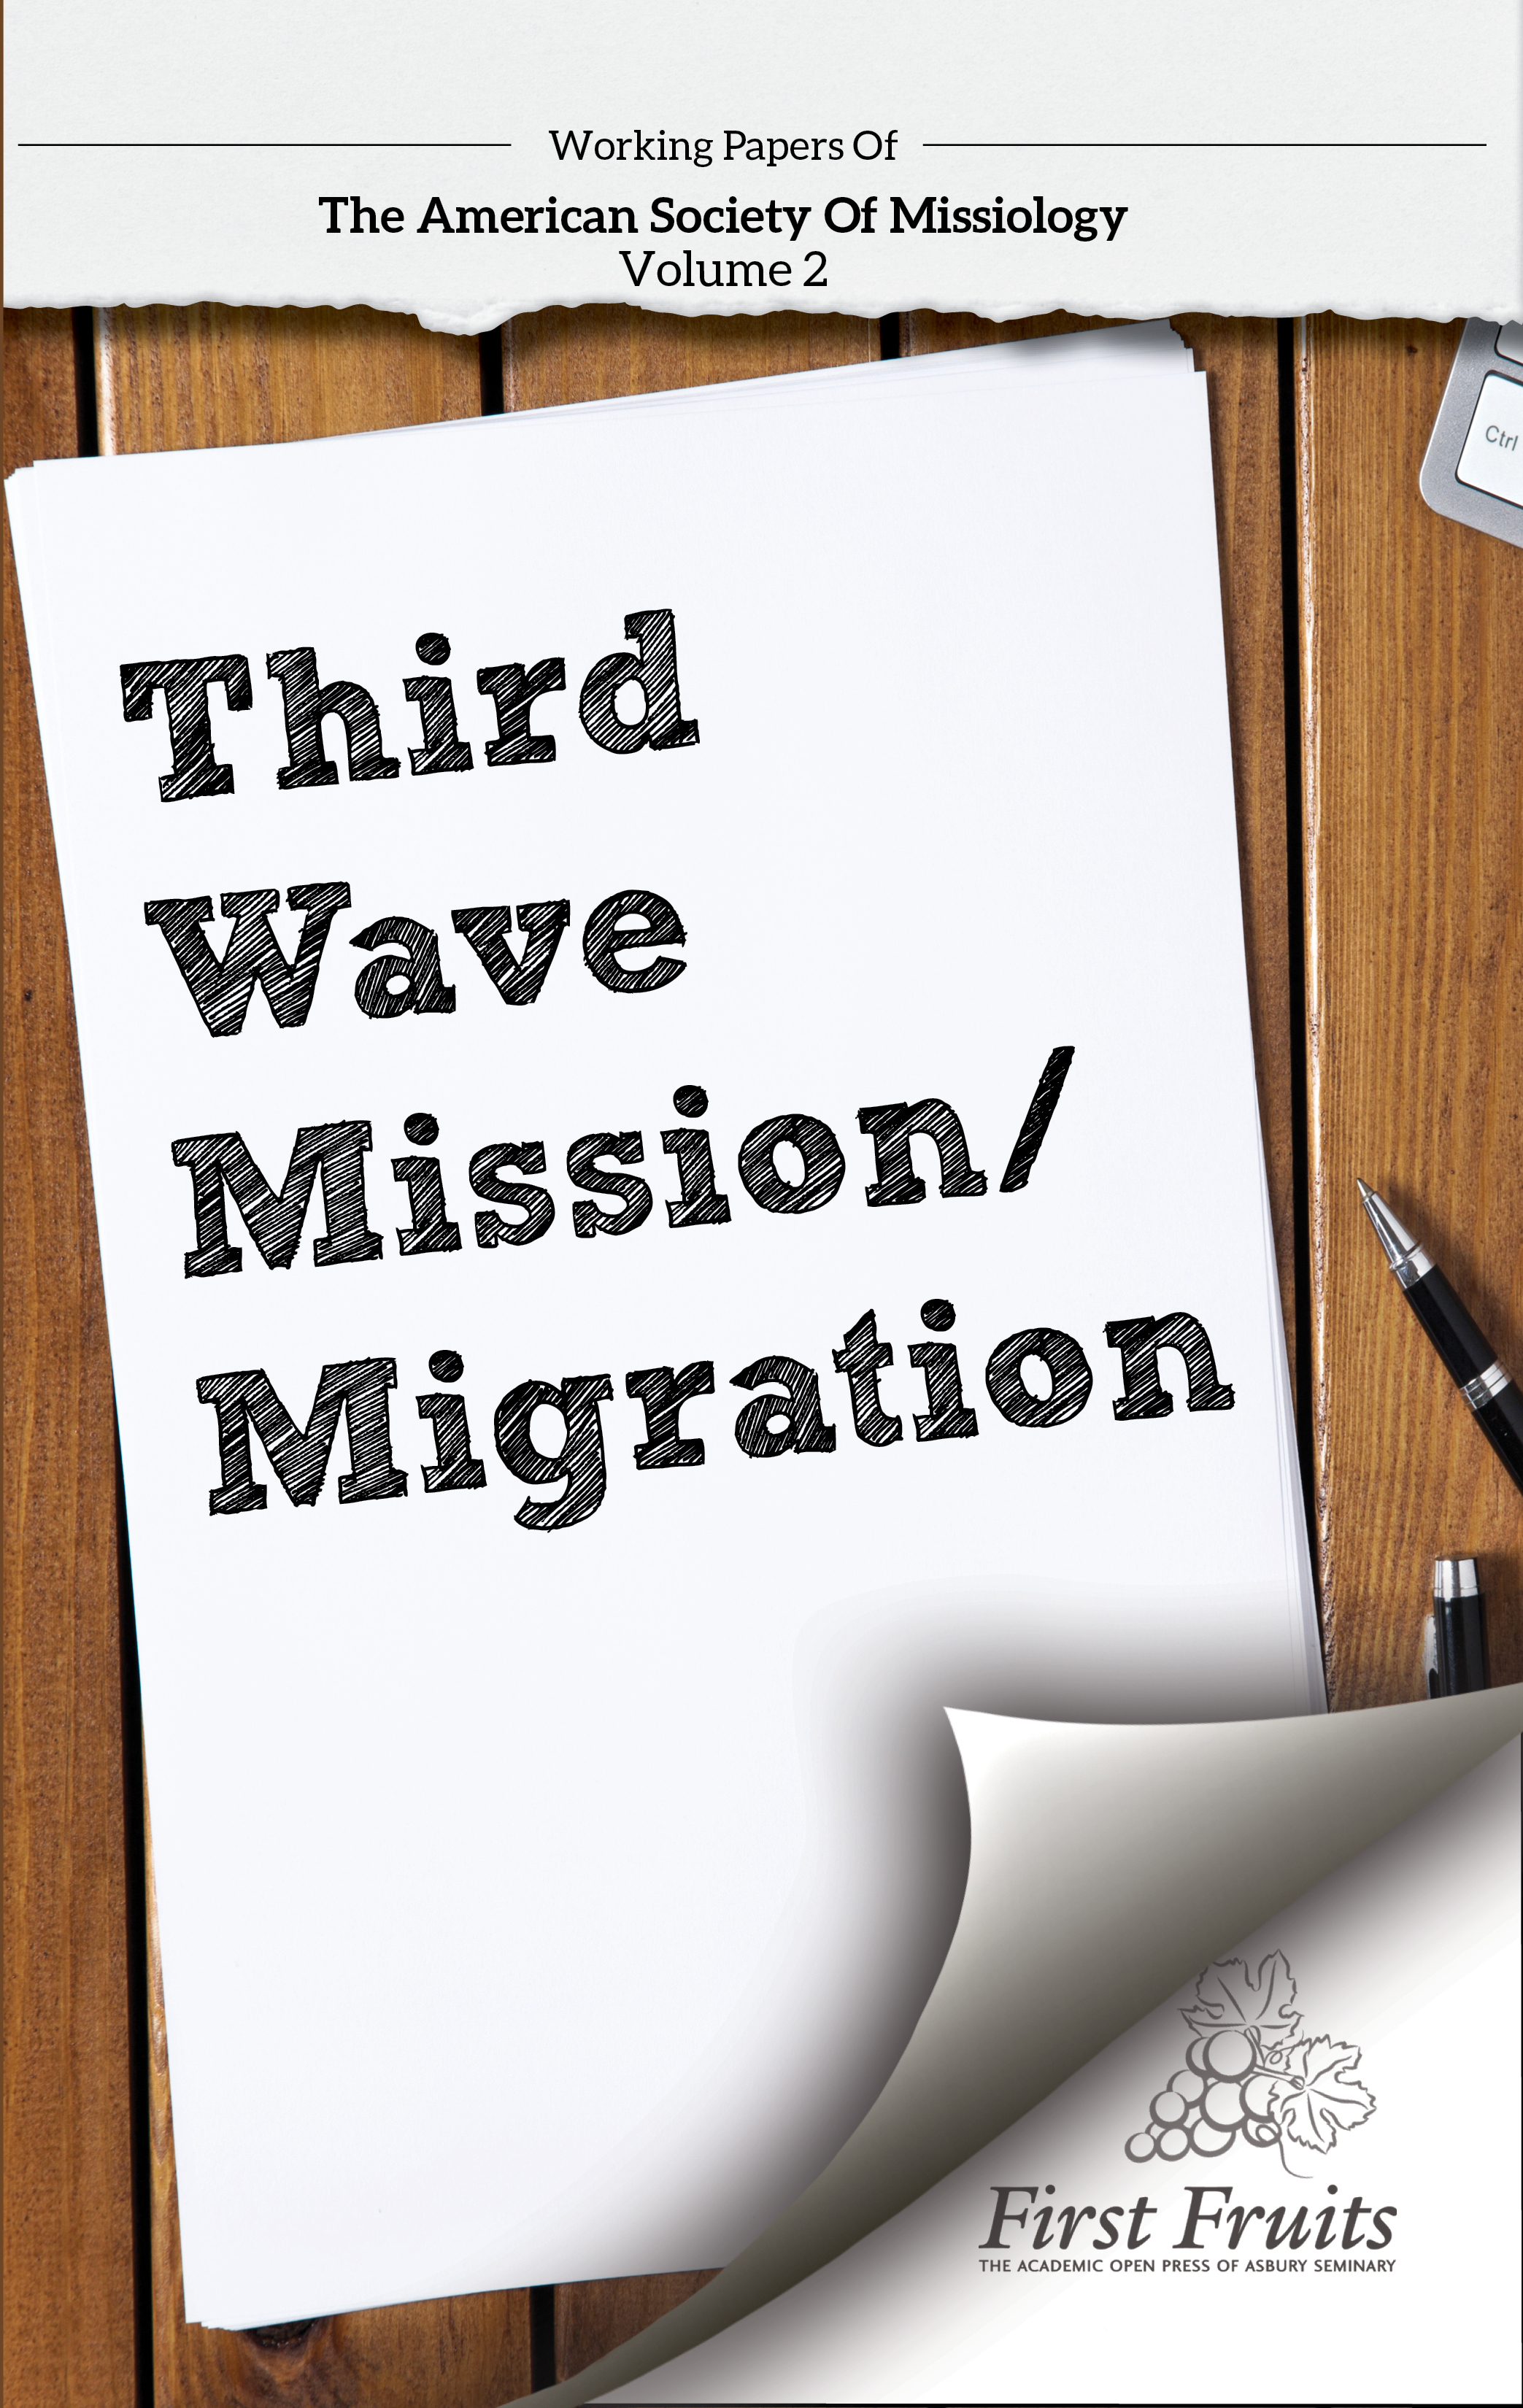 Working Papers Of The American Society Of Missiology; Vol. 2 Third Wave Missions/Migration